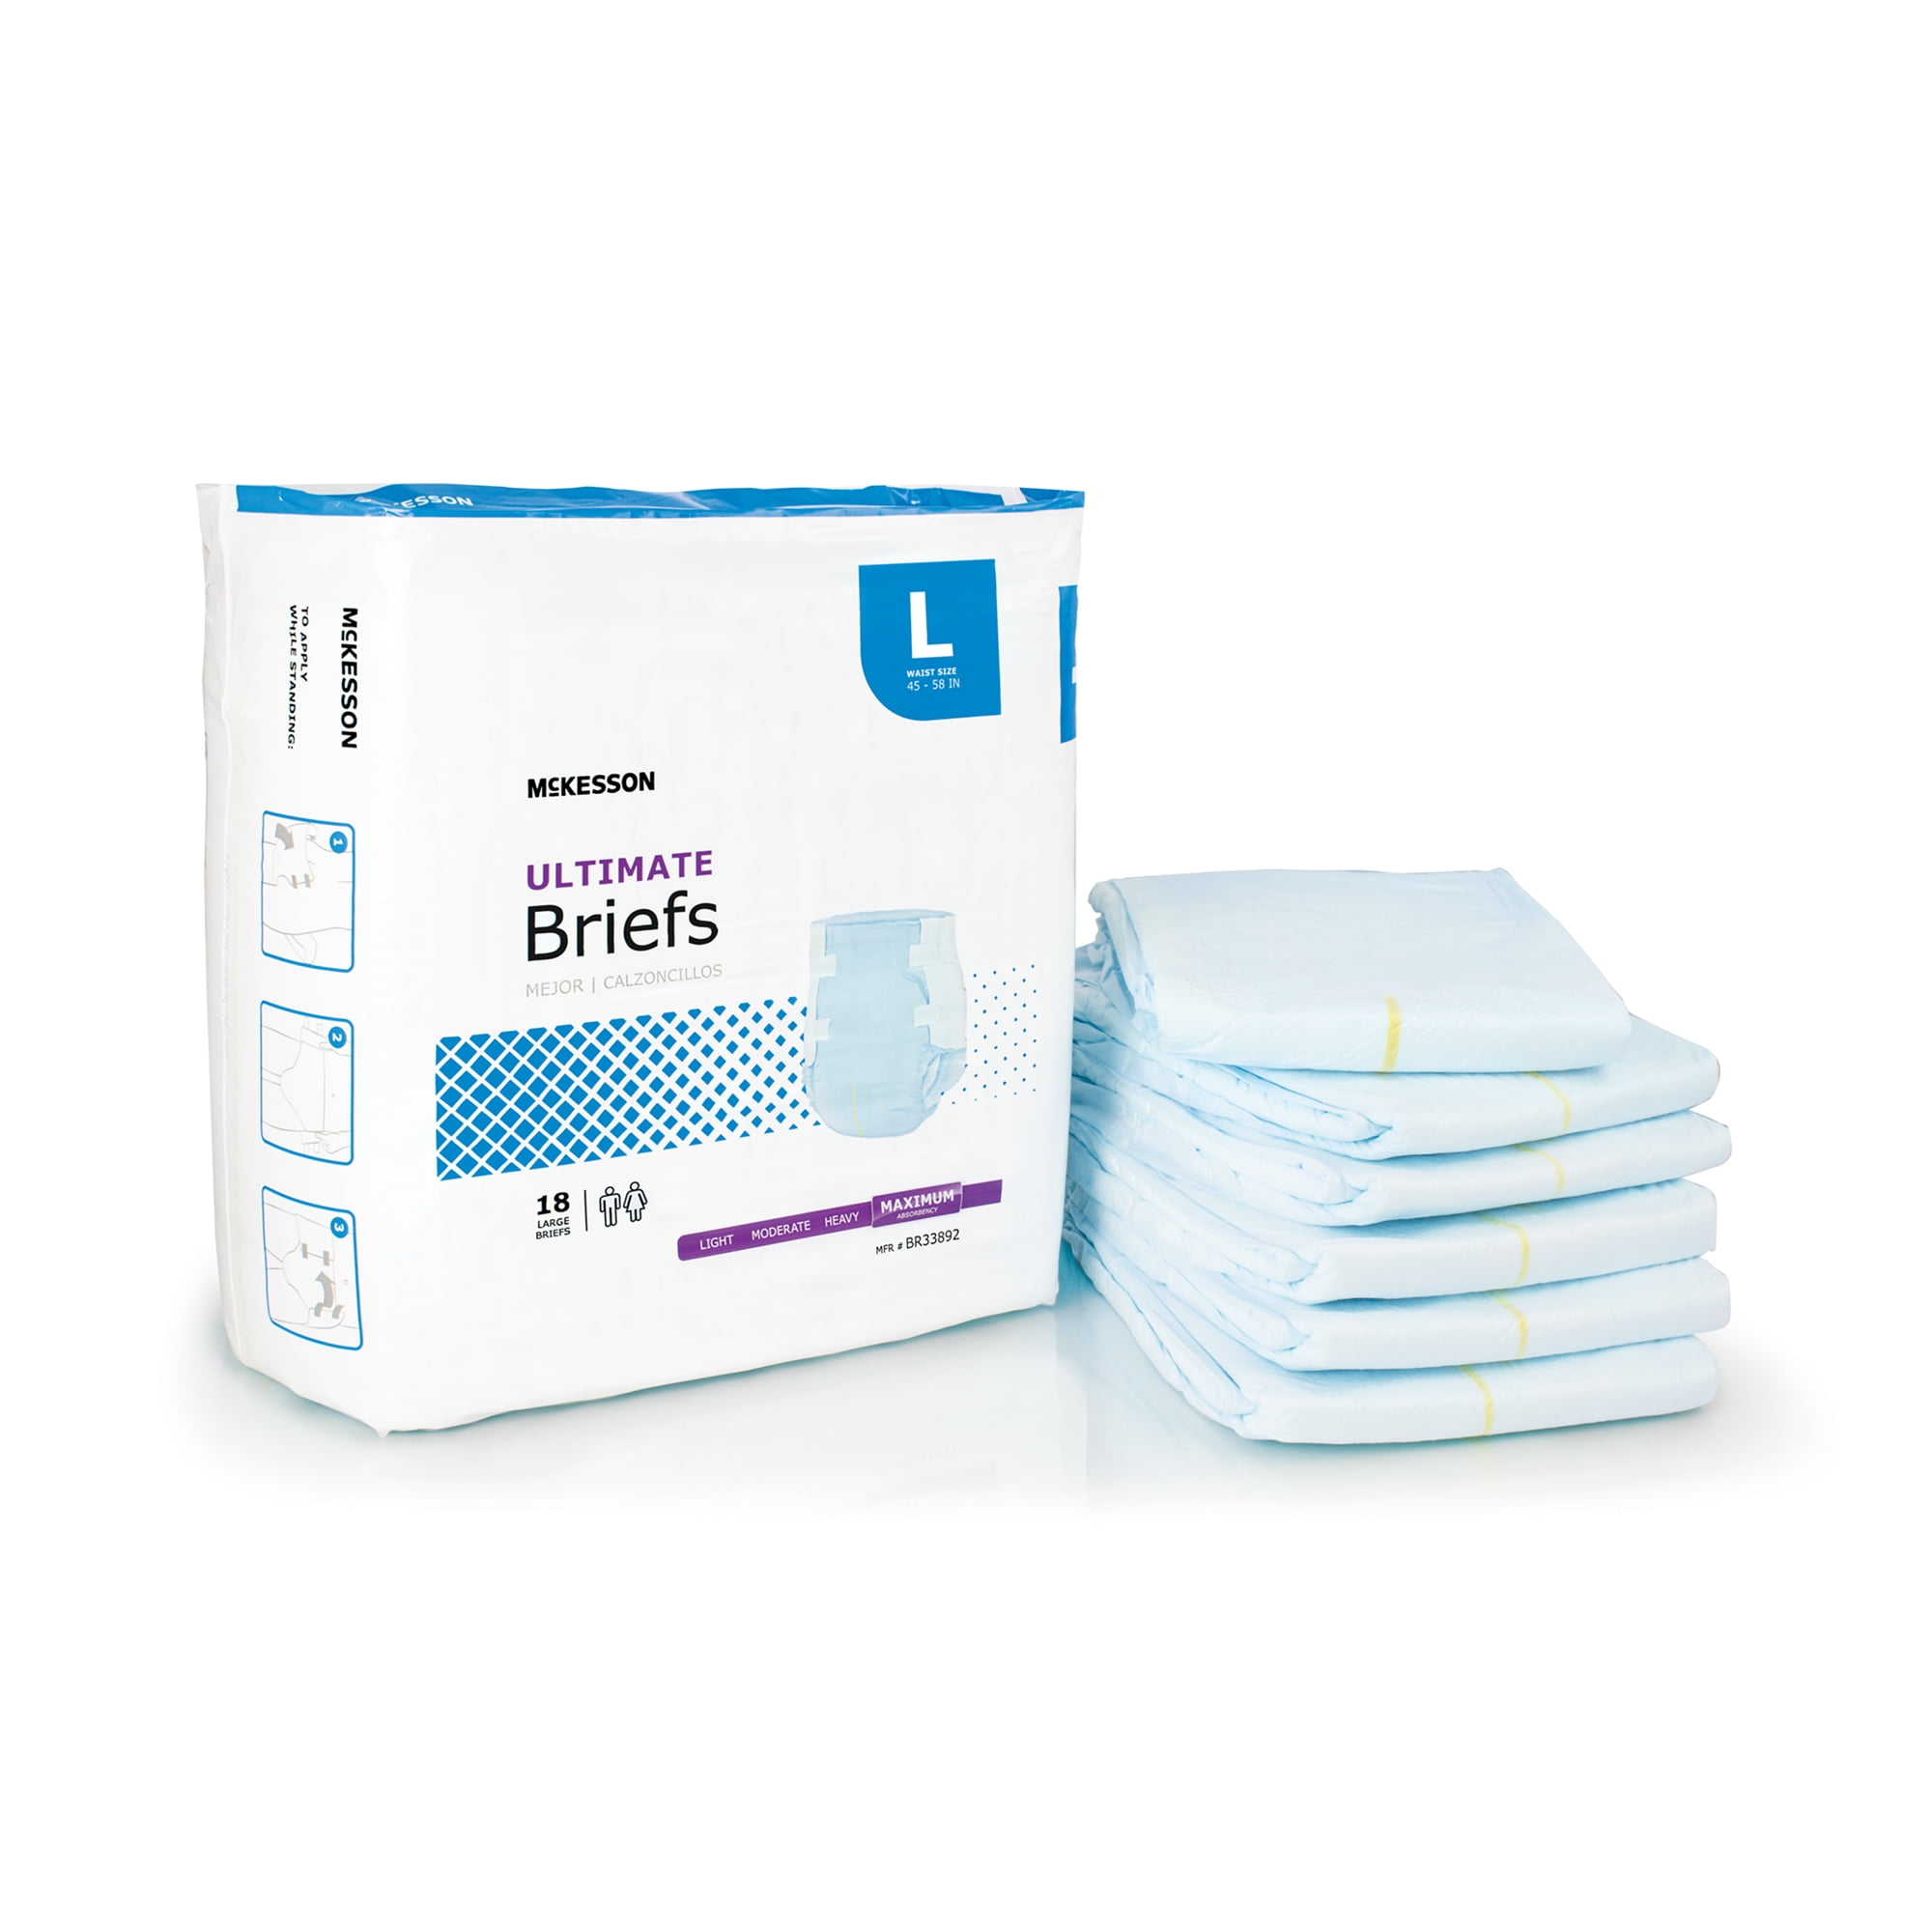 Adult Diapers Incontinence Briefs Large, 18 Pack - Overnight Heavy